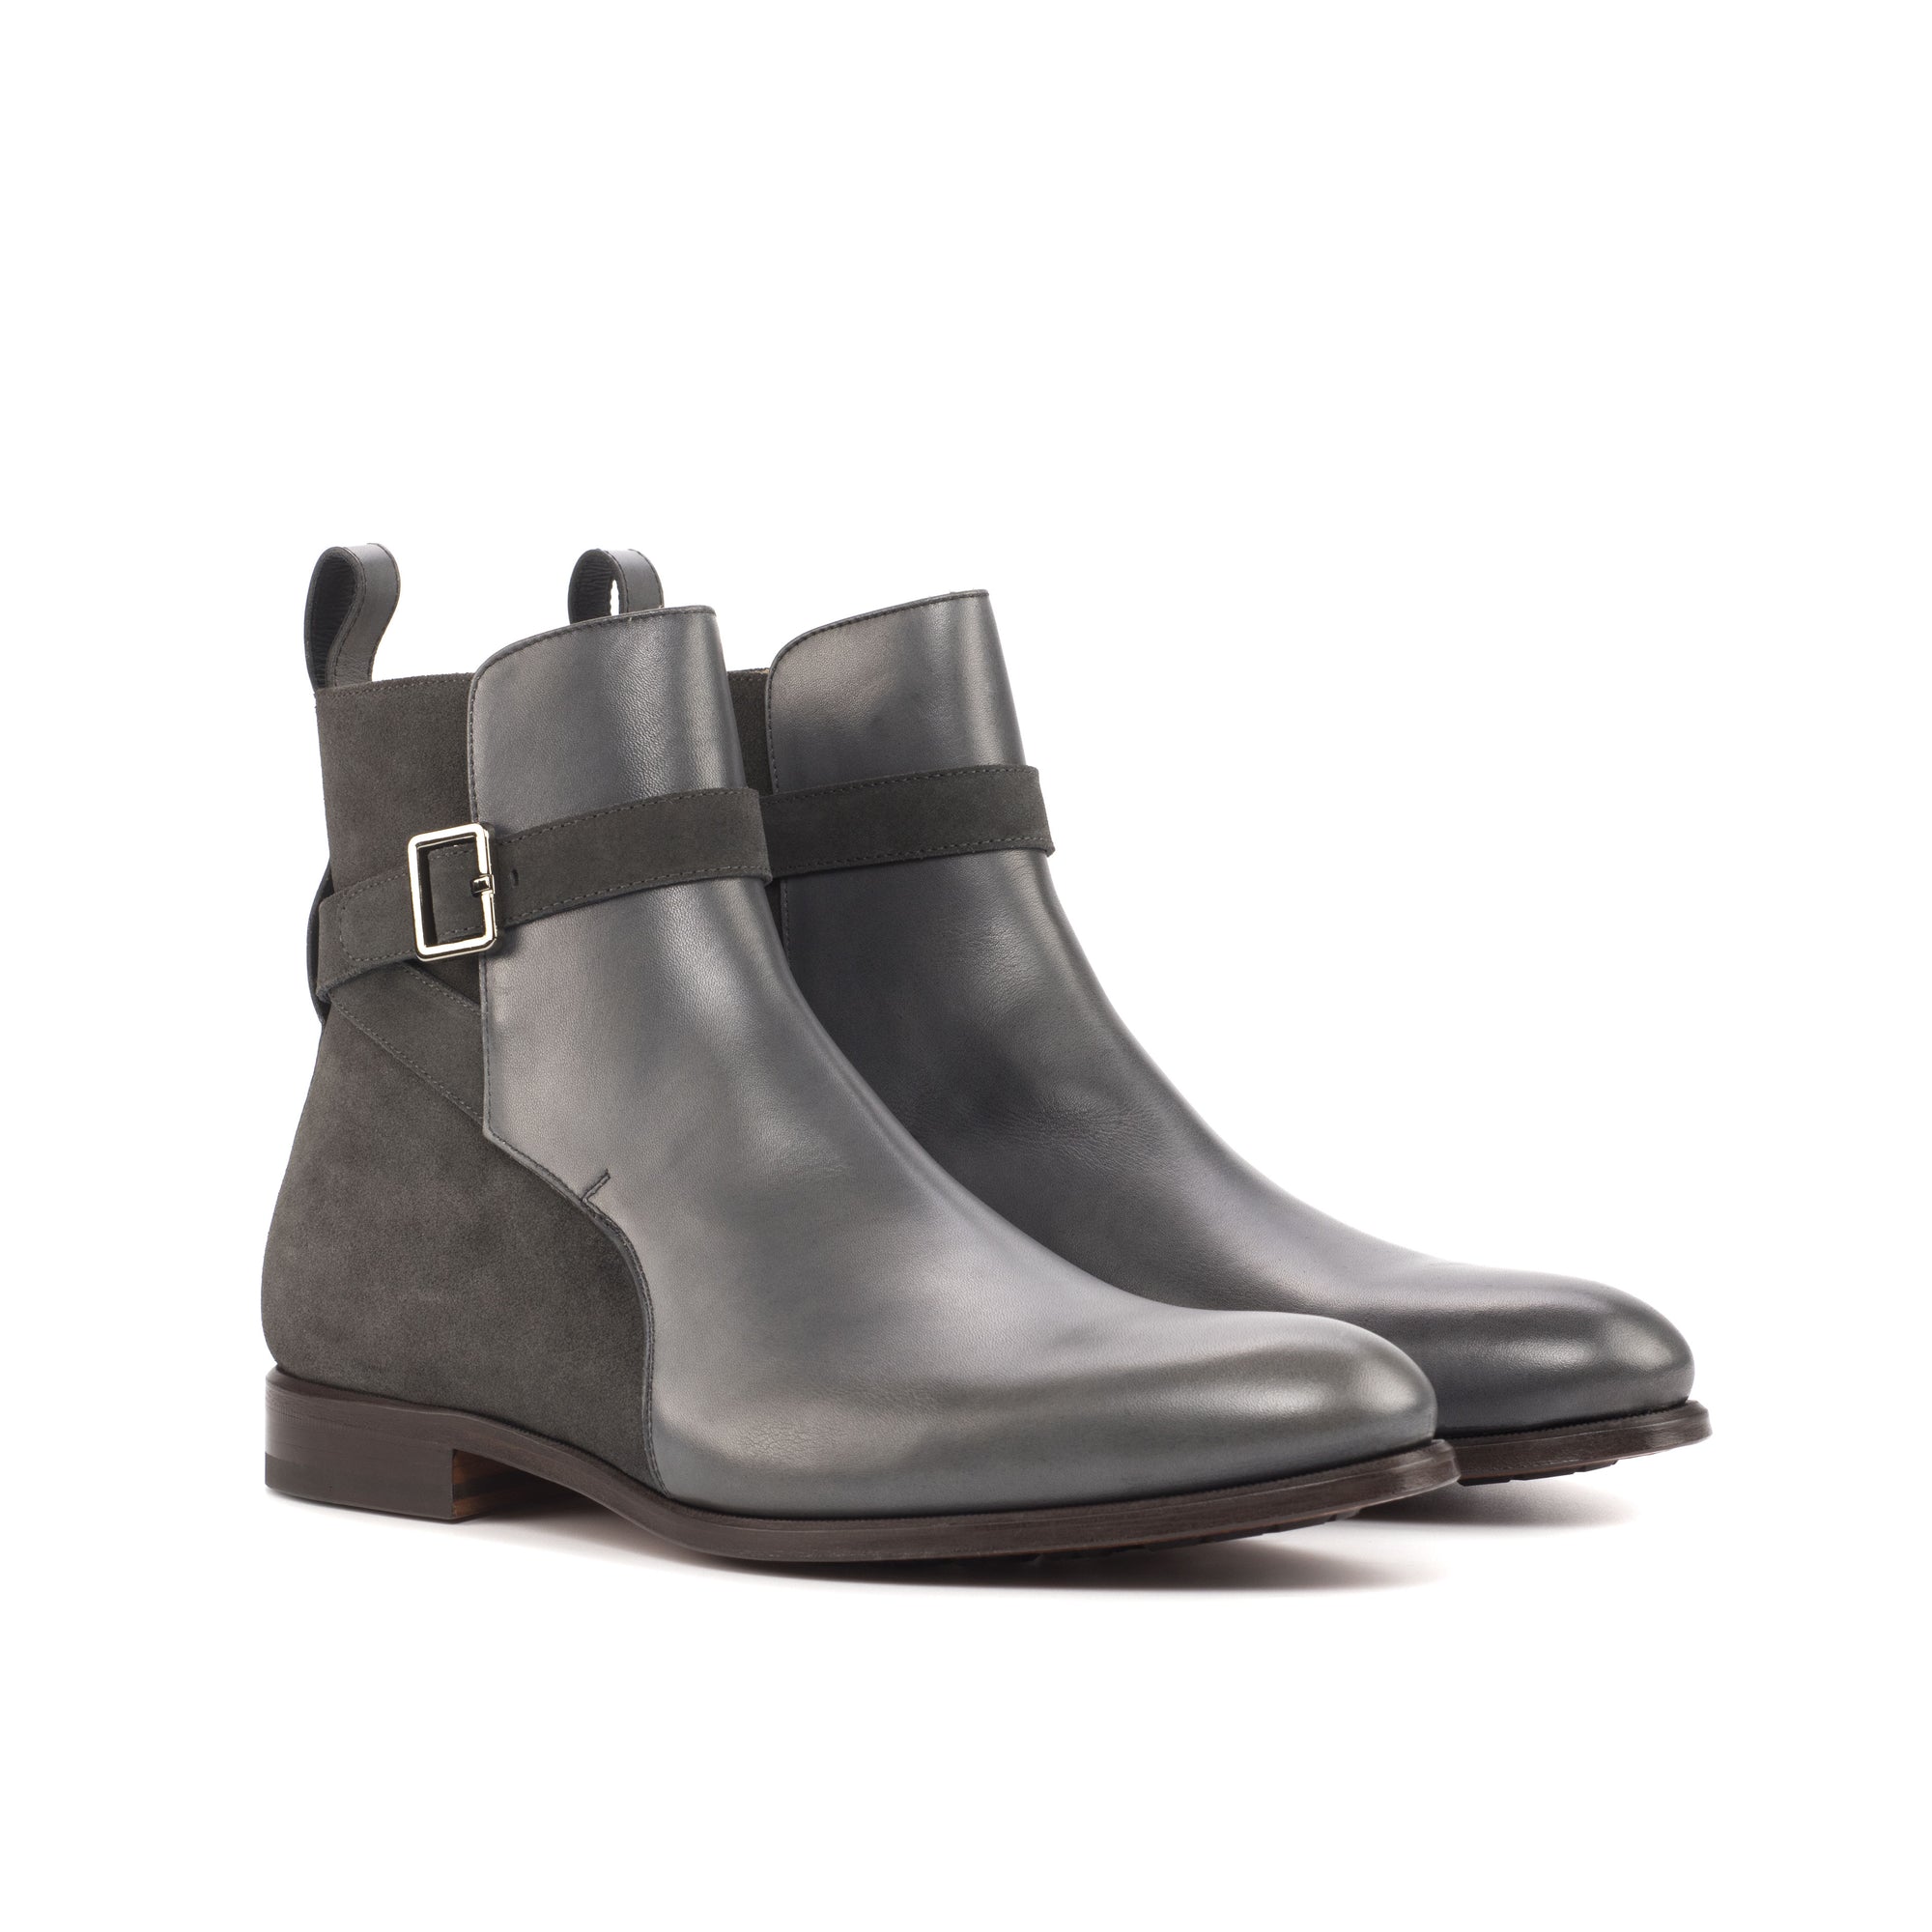 The Alfred Jodhpur Boot in Leather and Grey Suede